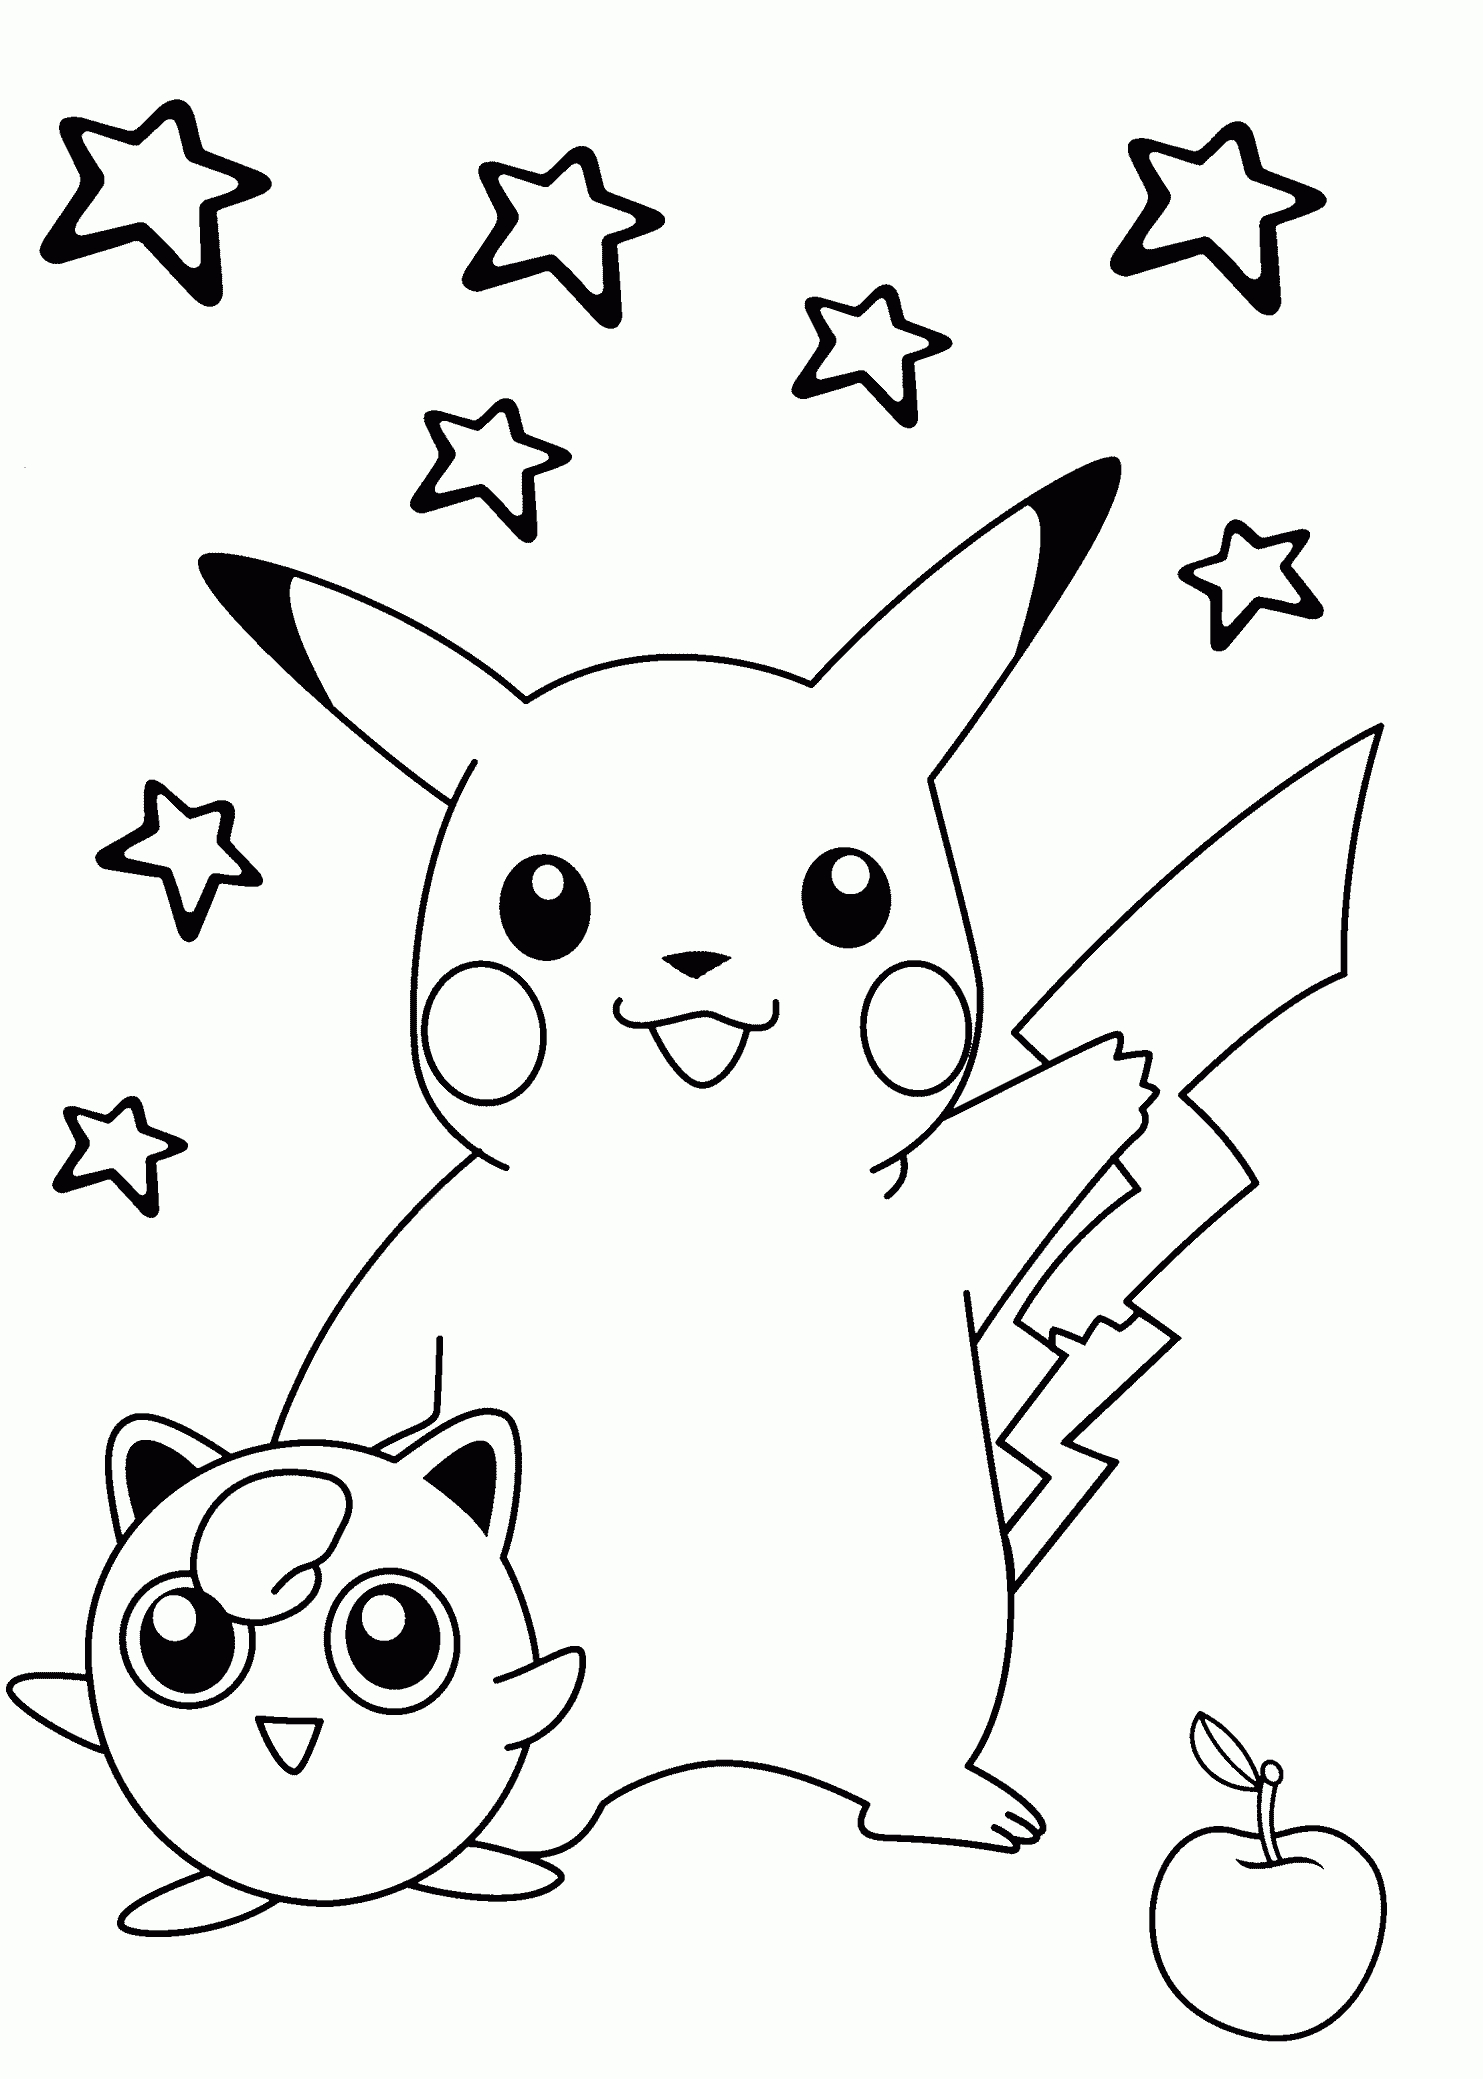 Smiling Pokemon Coloring Pages For Kids, Printable Free | Scanncut - Pokemon Coloring Sheets Free Printable